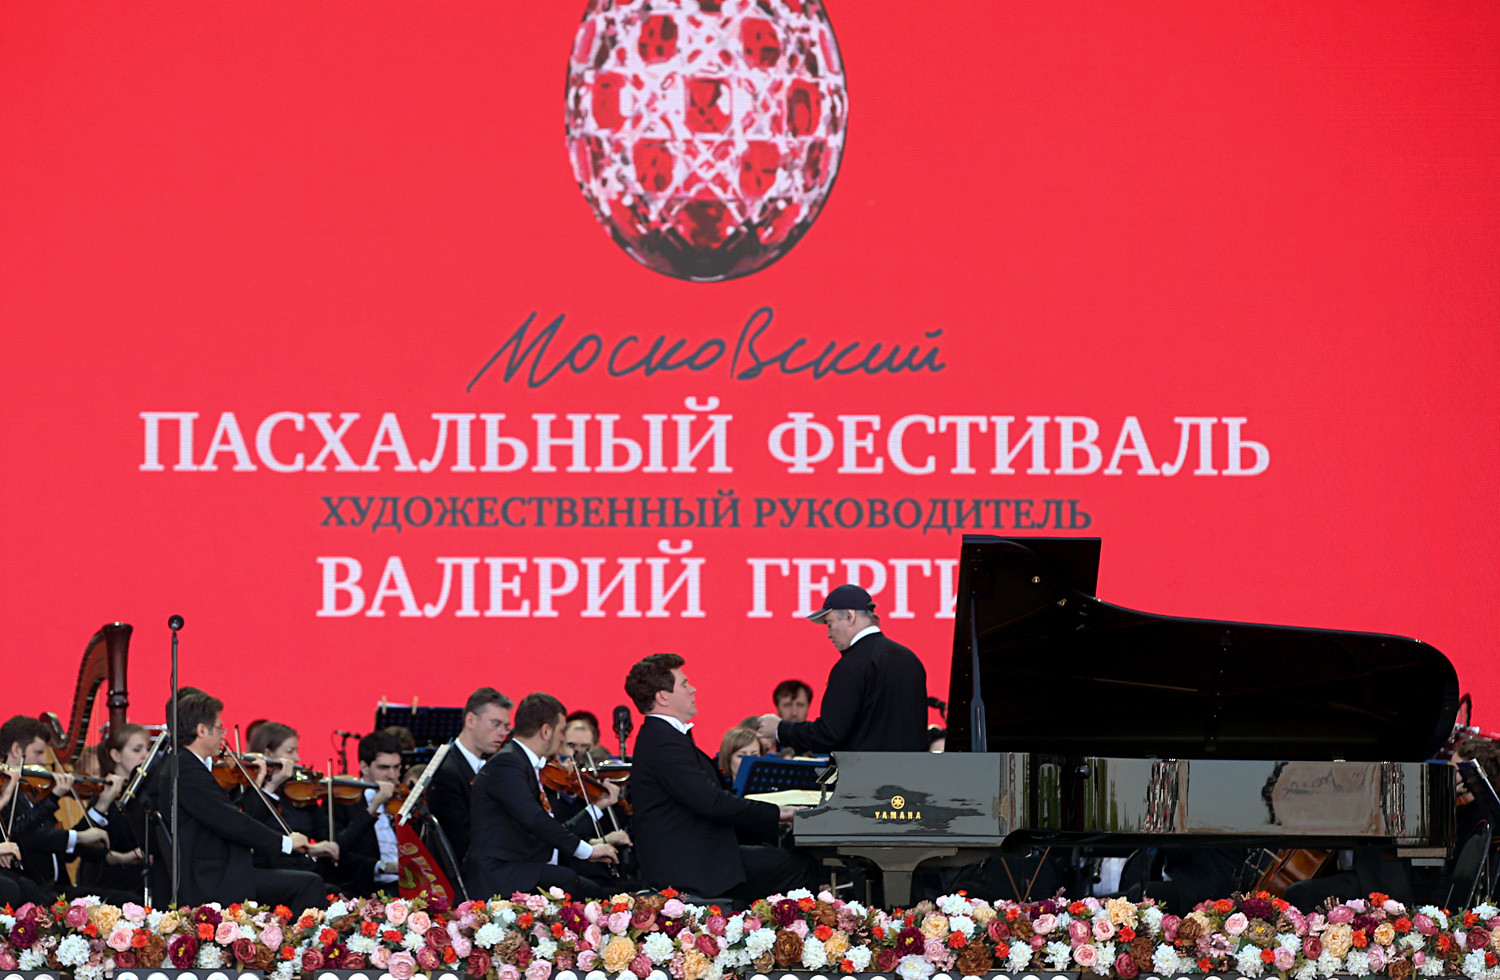 Valery Gergiev, Russian conductor, general director and artistic director of the Mariinsky Theatre, and Russian pianist Denis Matsuev perform during a Easter Festival on Moscow's Poklonnaya Hill.